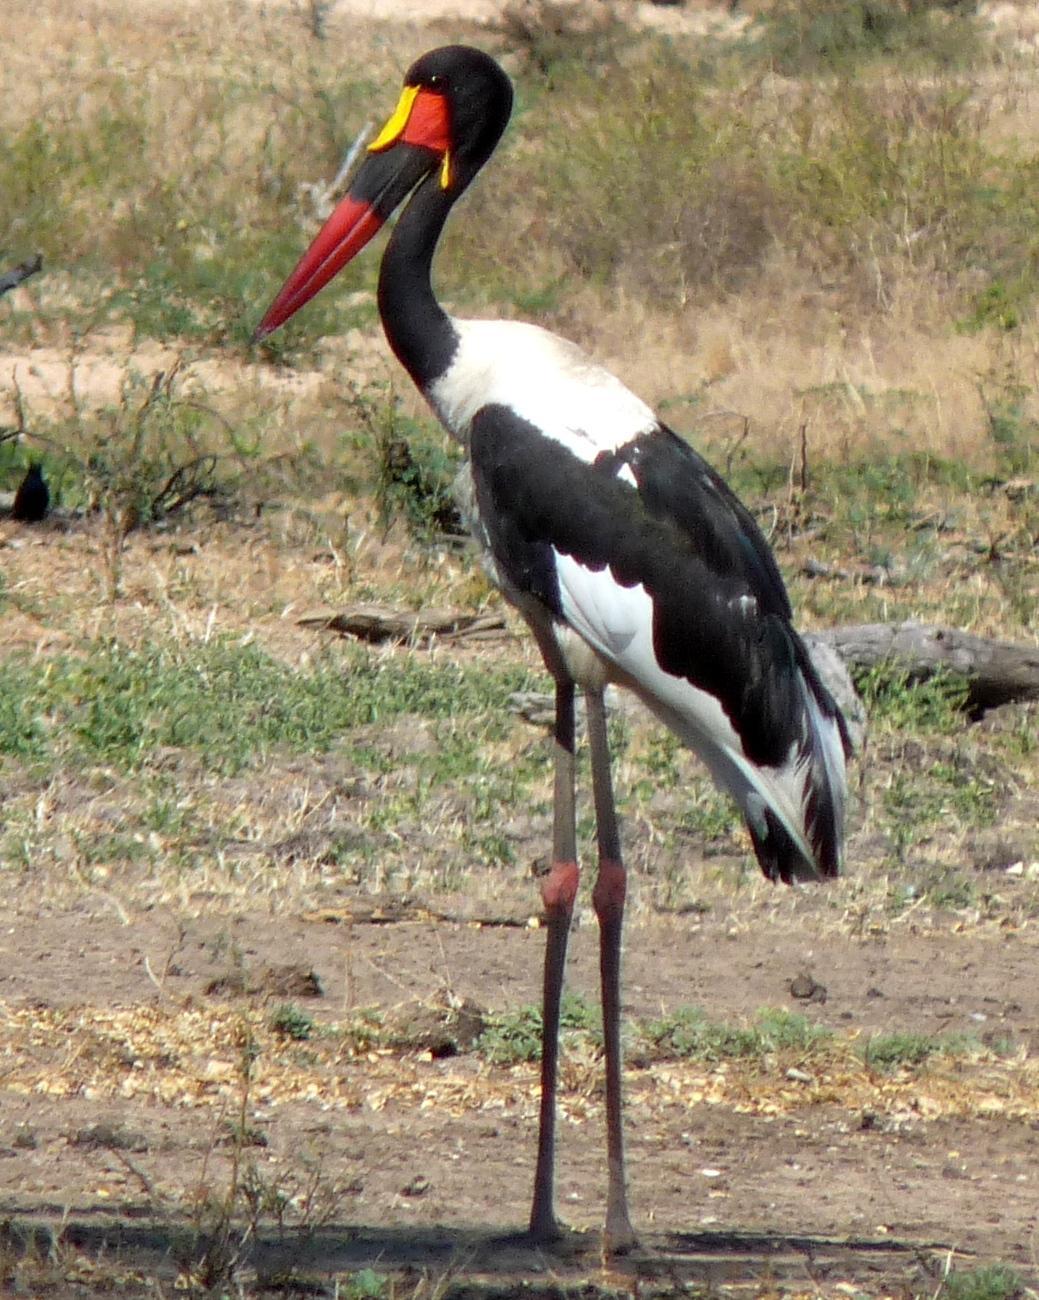 Saddle-billed Stork Photo by Peter Lowe